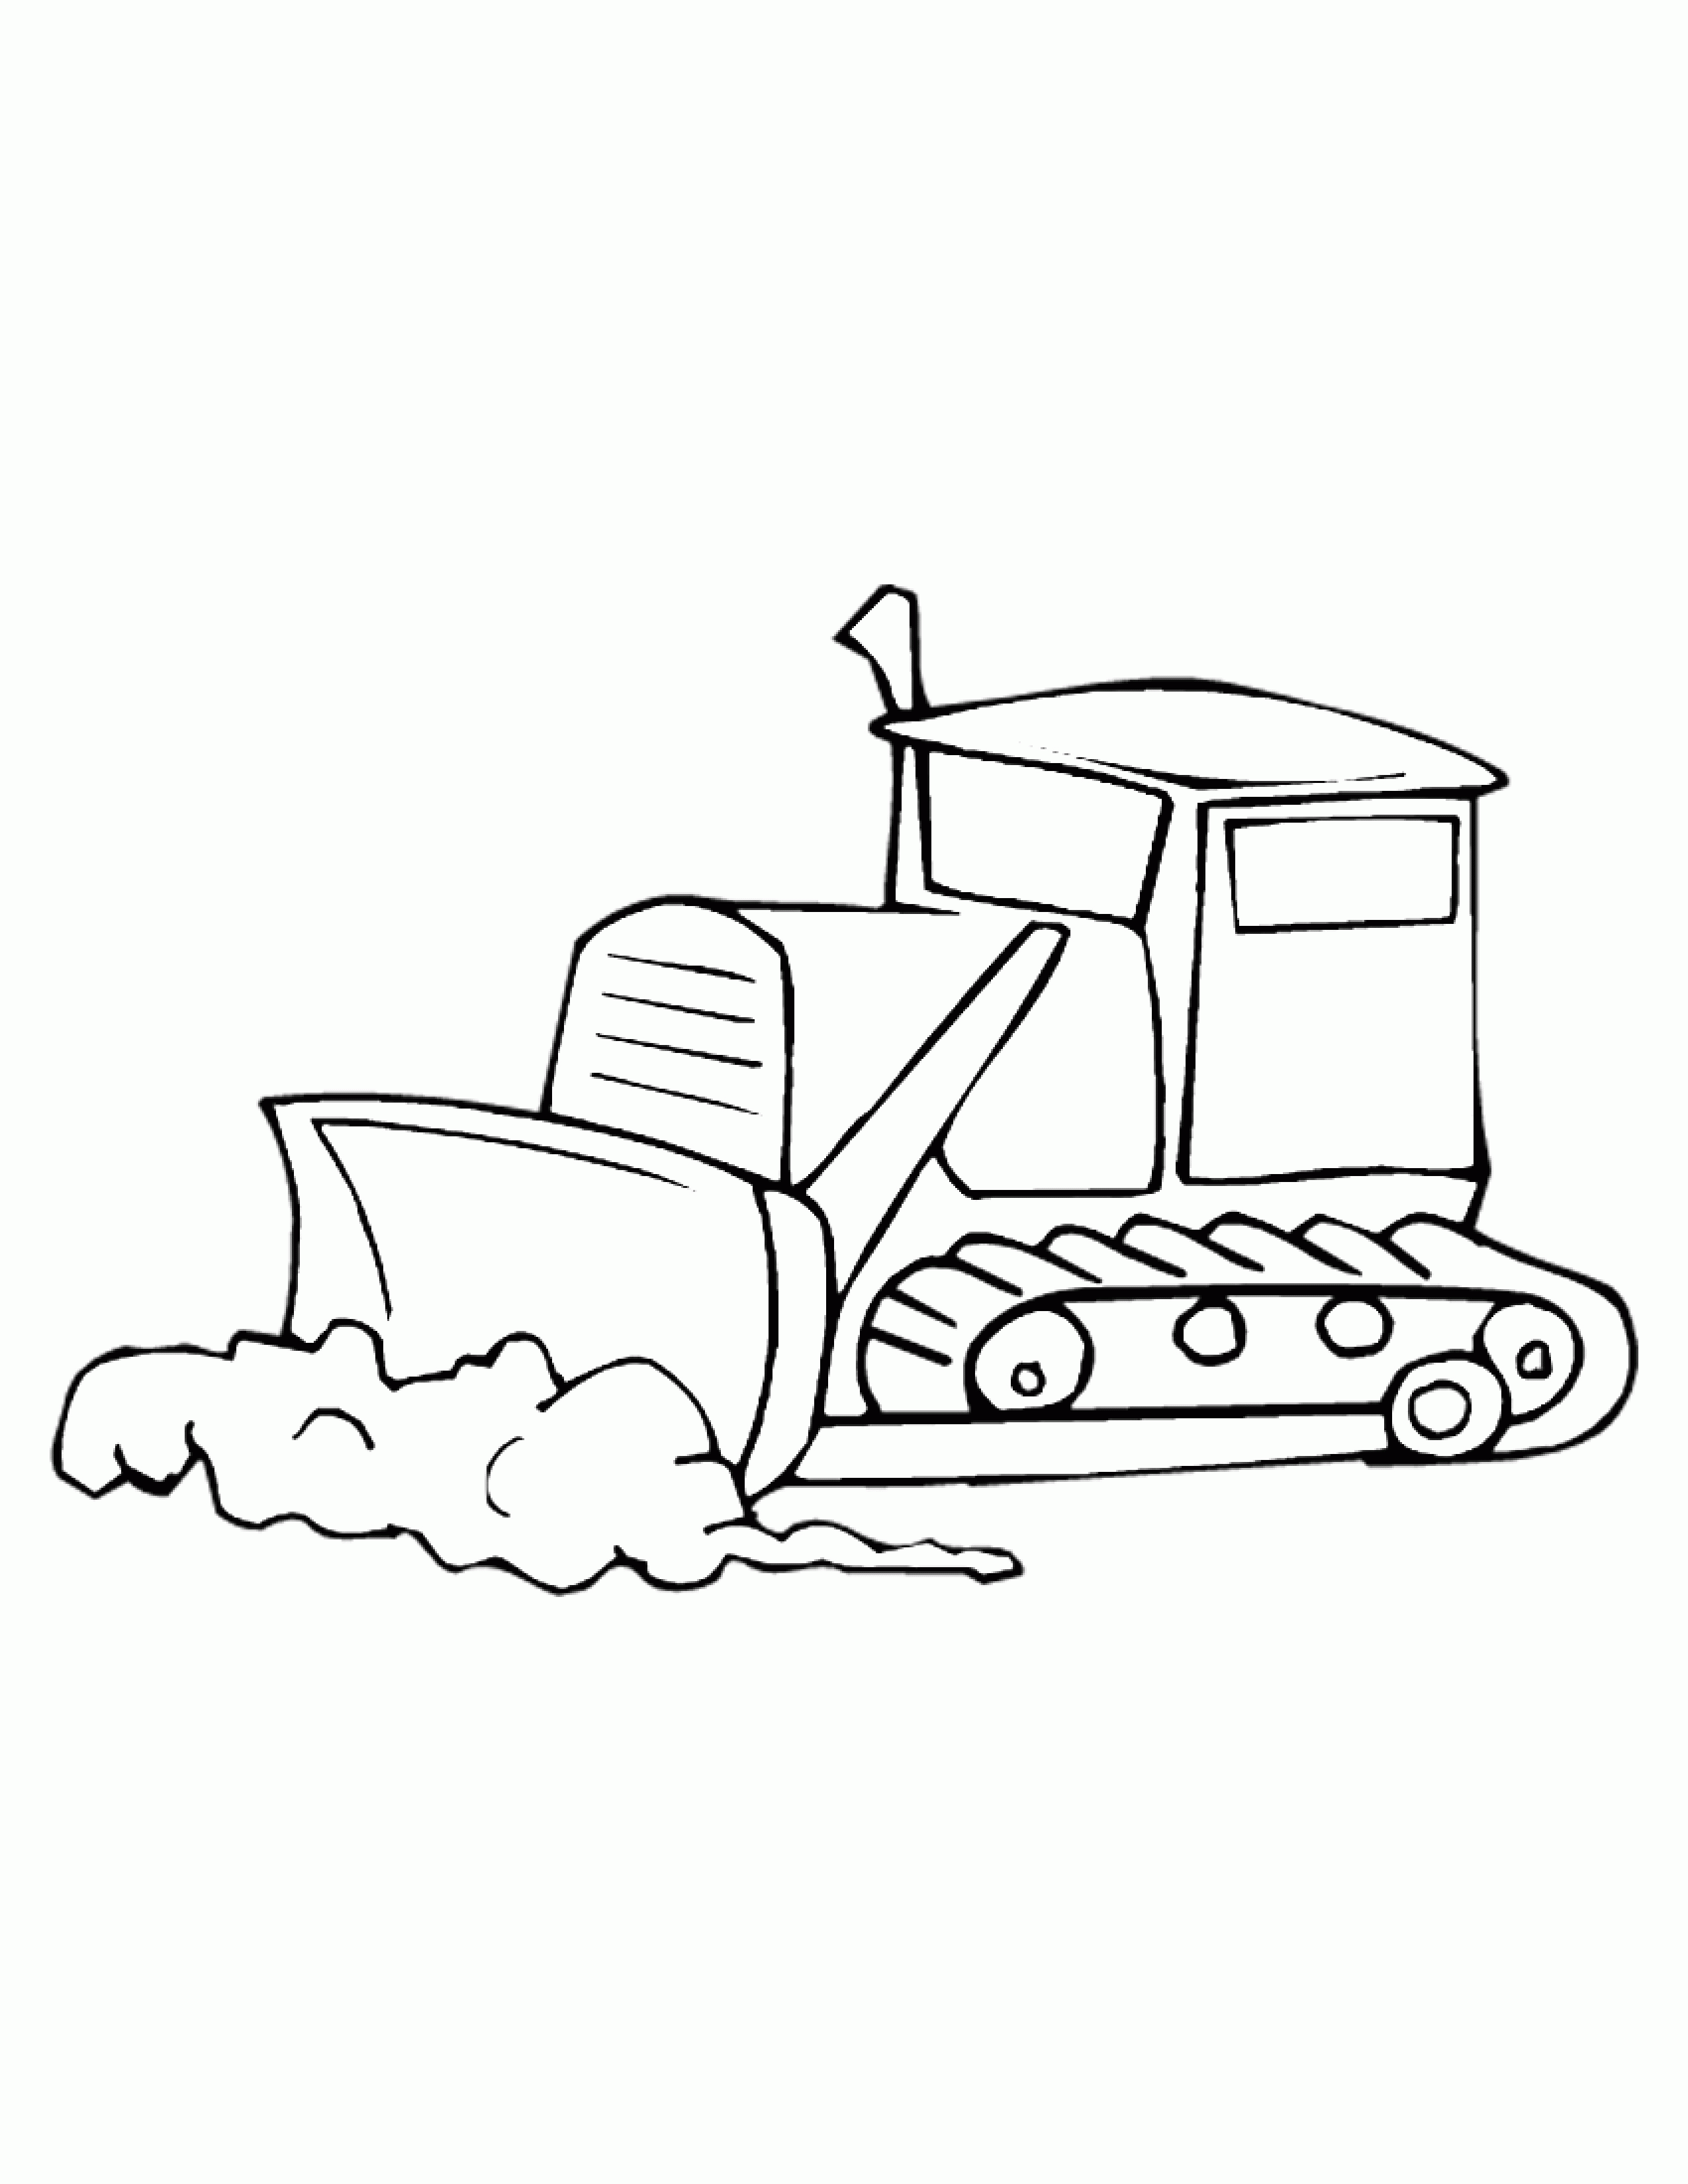 9 Pics of Free Construction Equipment Coloring Pages - Printable ...